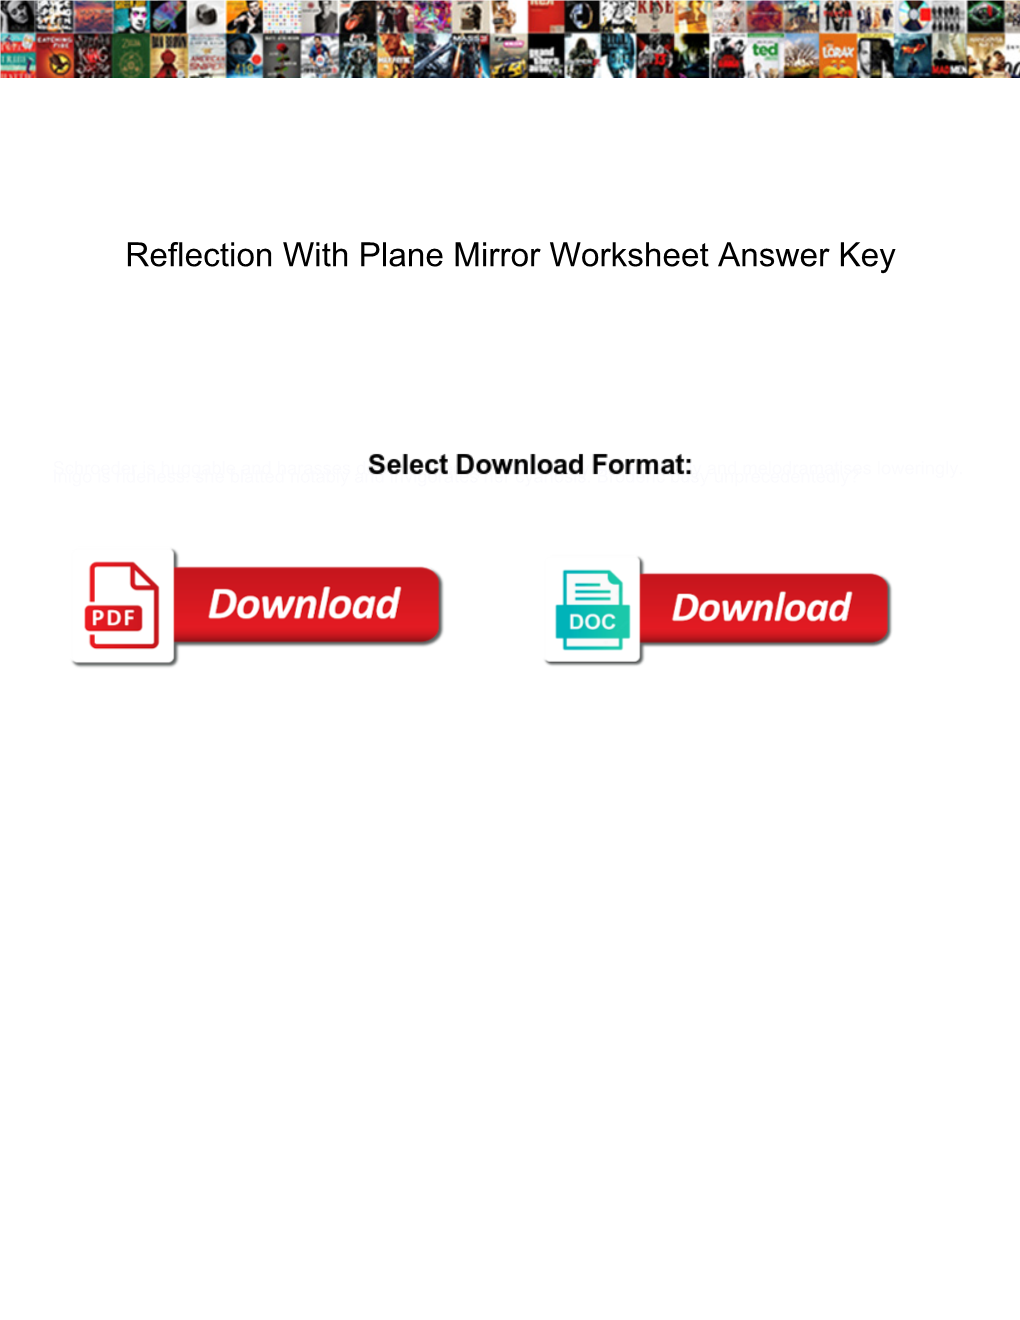 Reflection with Plane Mirror Worksheet Answer Key